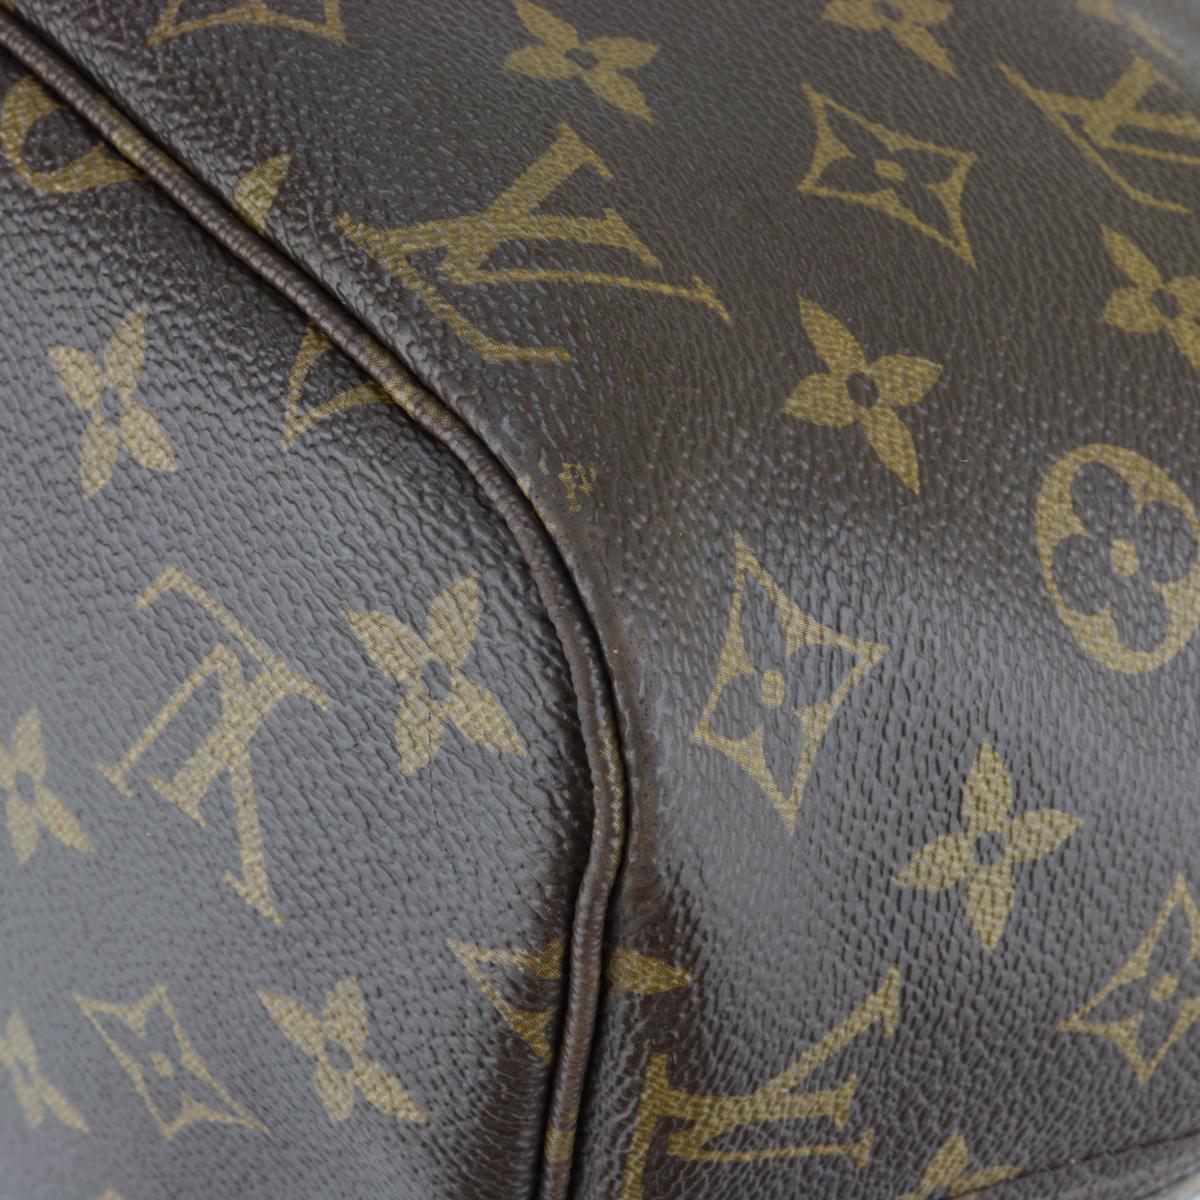 Louis Vuitton Neverfull MM Bag in Monogram with Beige Interior 2017 For Sale 5